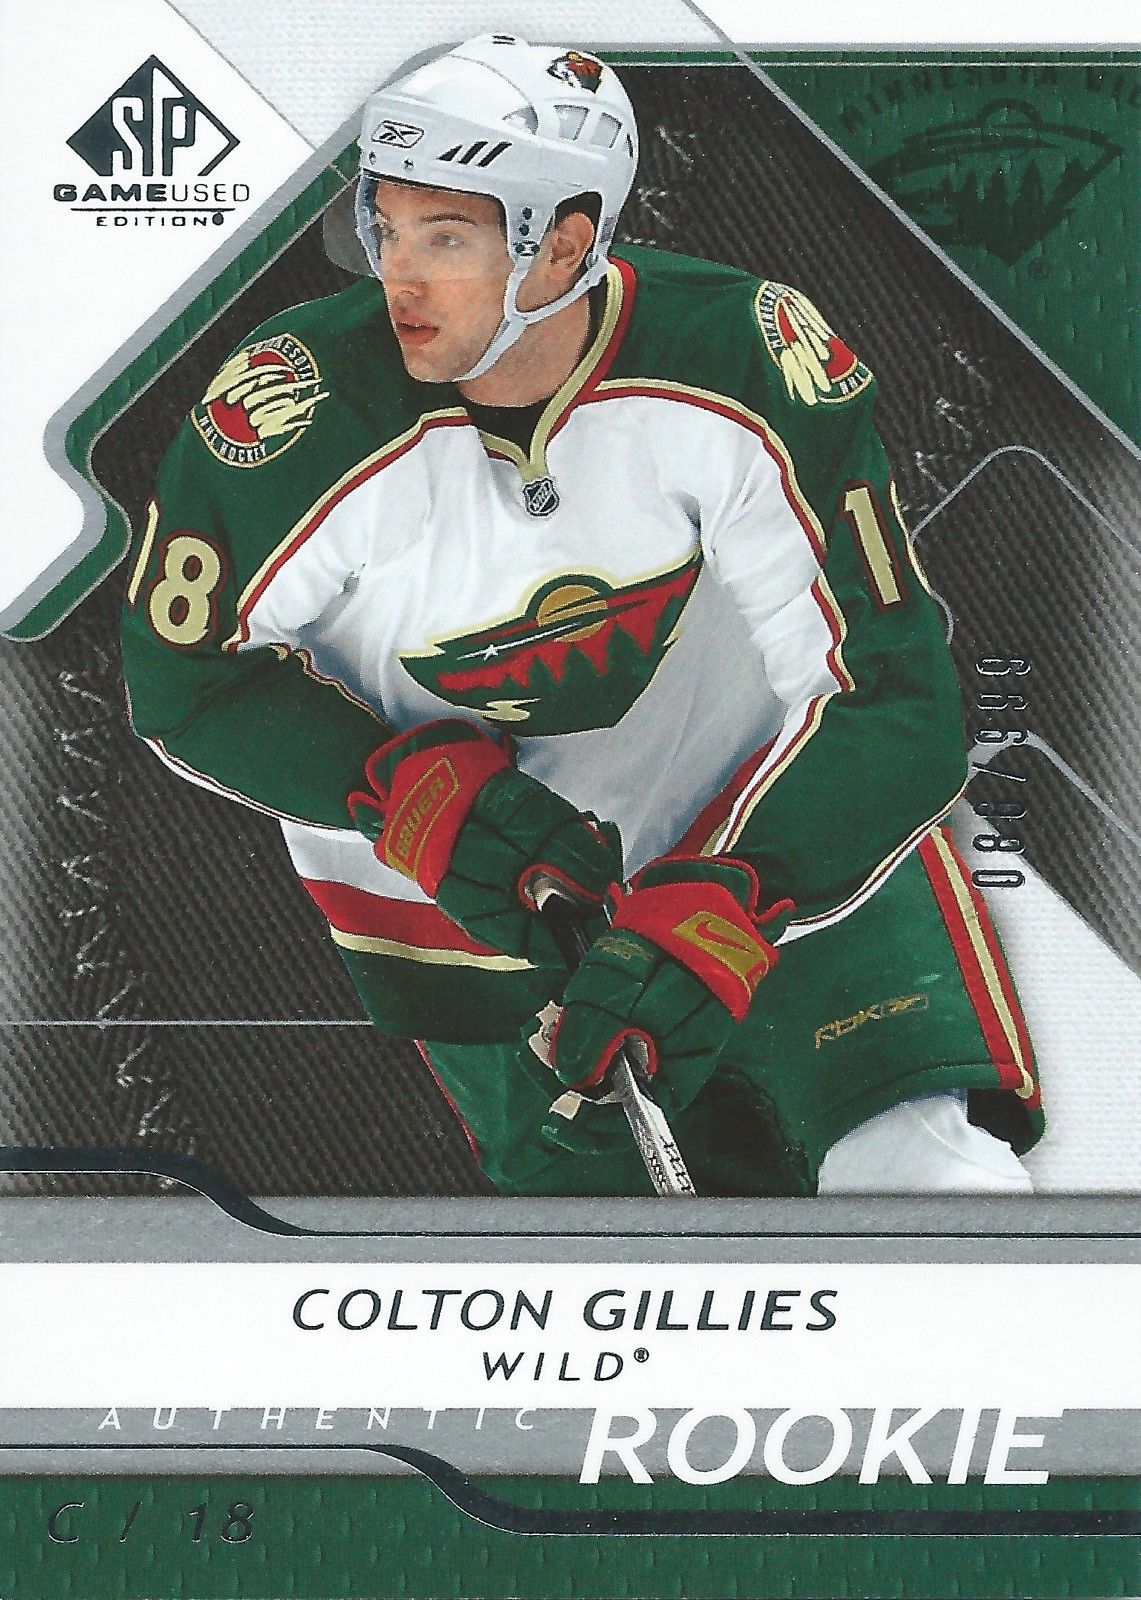  2008-09 SP Game Used COLTON GILLIES Rookie /999 Upper Deck RC NHL 00994 Image 1